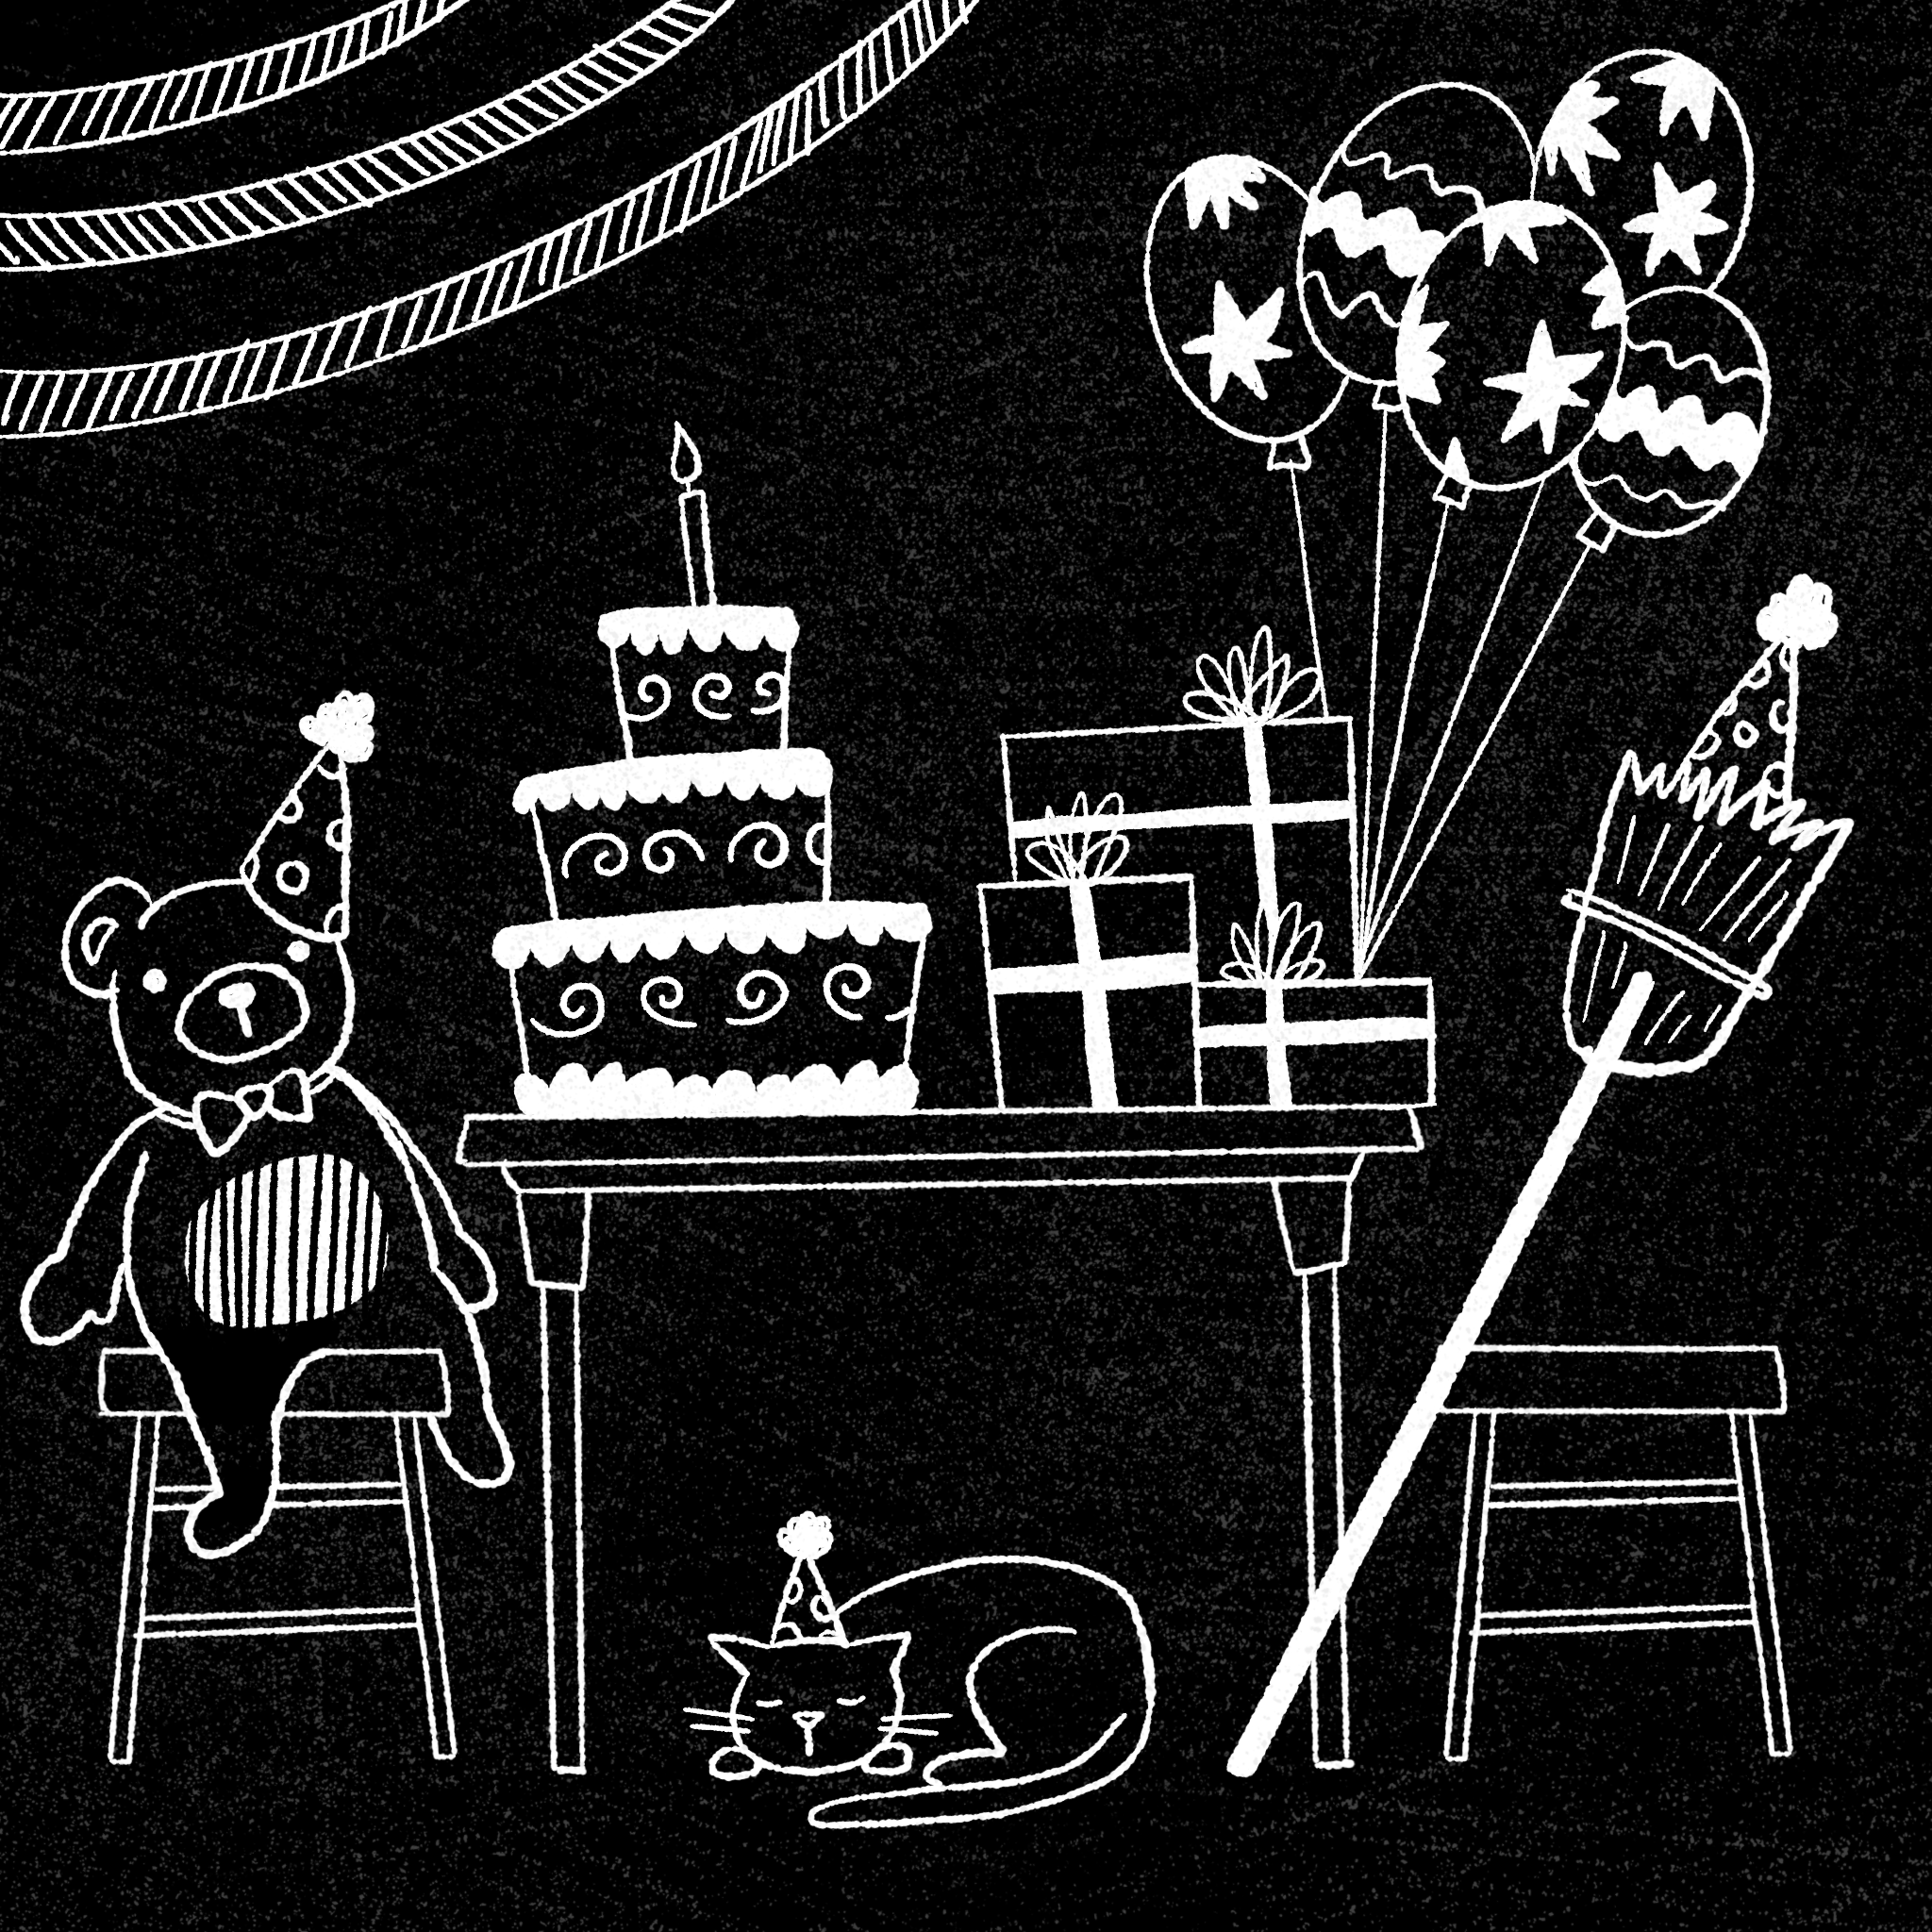 Illustration of a teddy bear, birthday cake, presents and balloons.